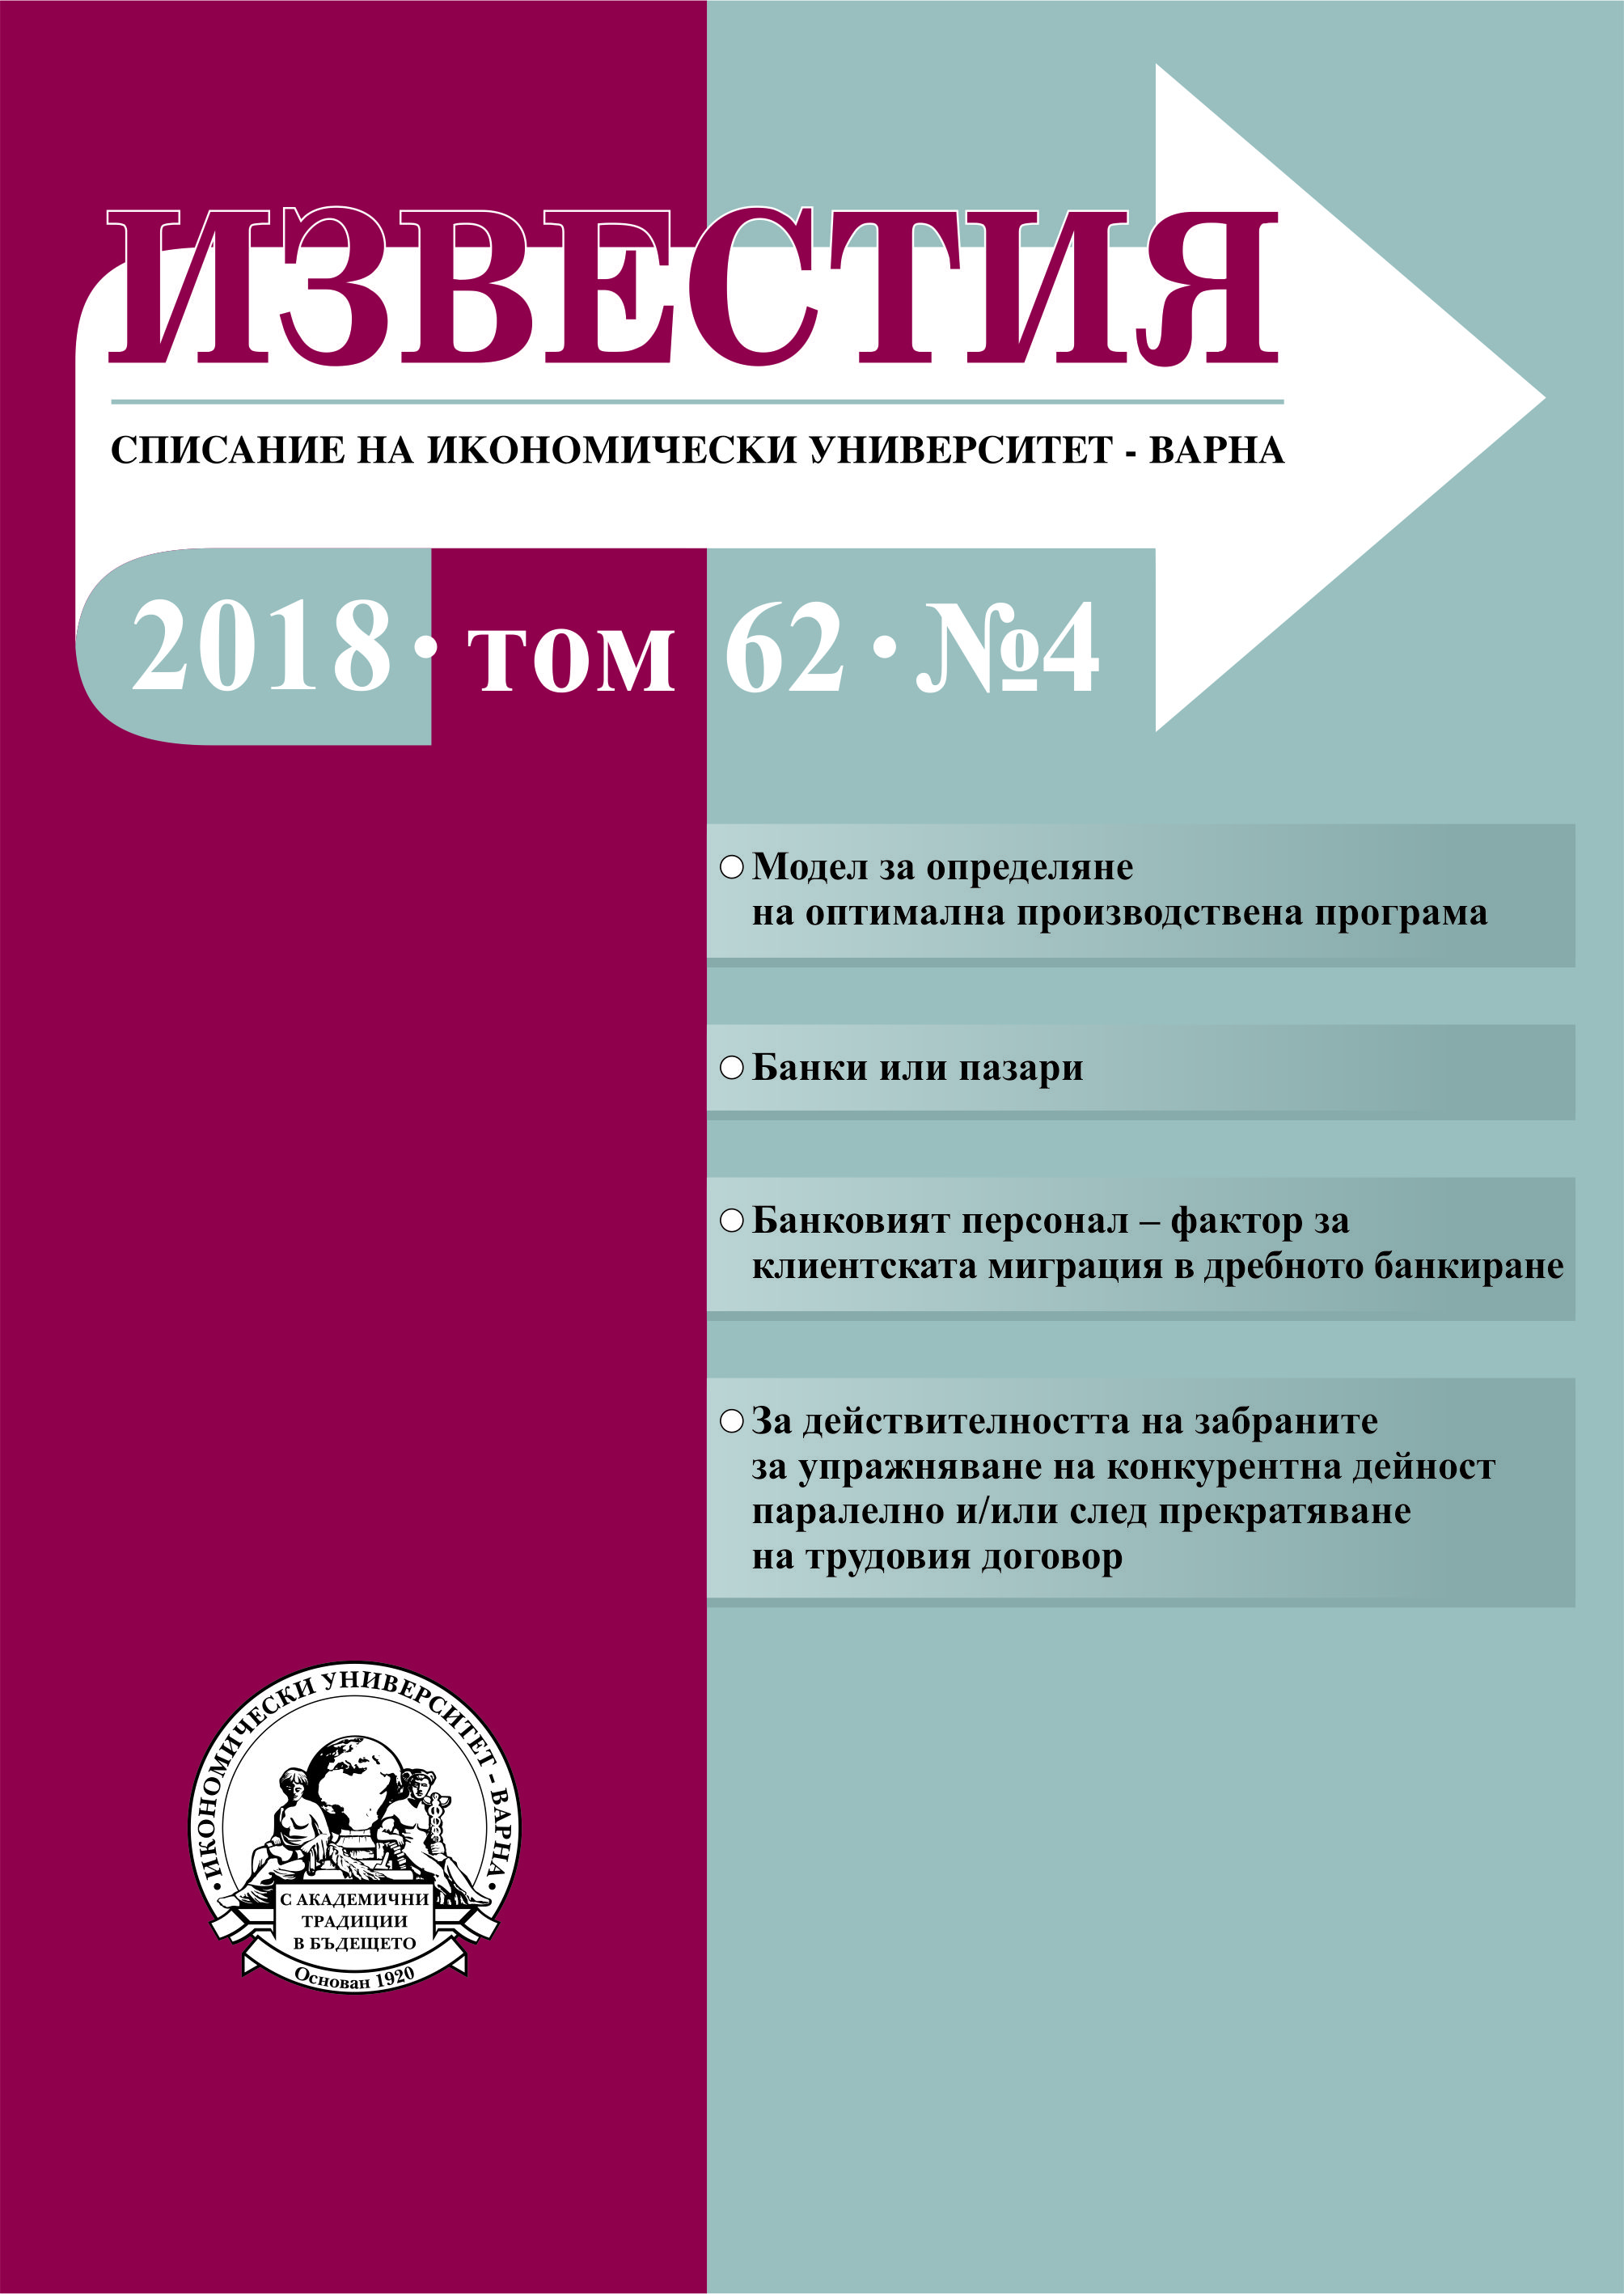 Regulation № 1672/2018 of the European Parliament and of The Council on Cash Entering or Leaving the Union and Penalties in the Bulgarian Legislation for Non-Compliance with the Obligation to Declare Cash Cover Image